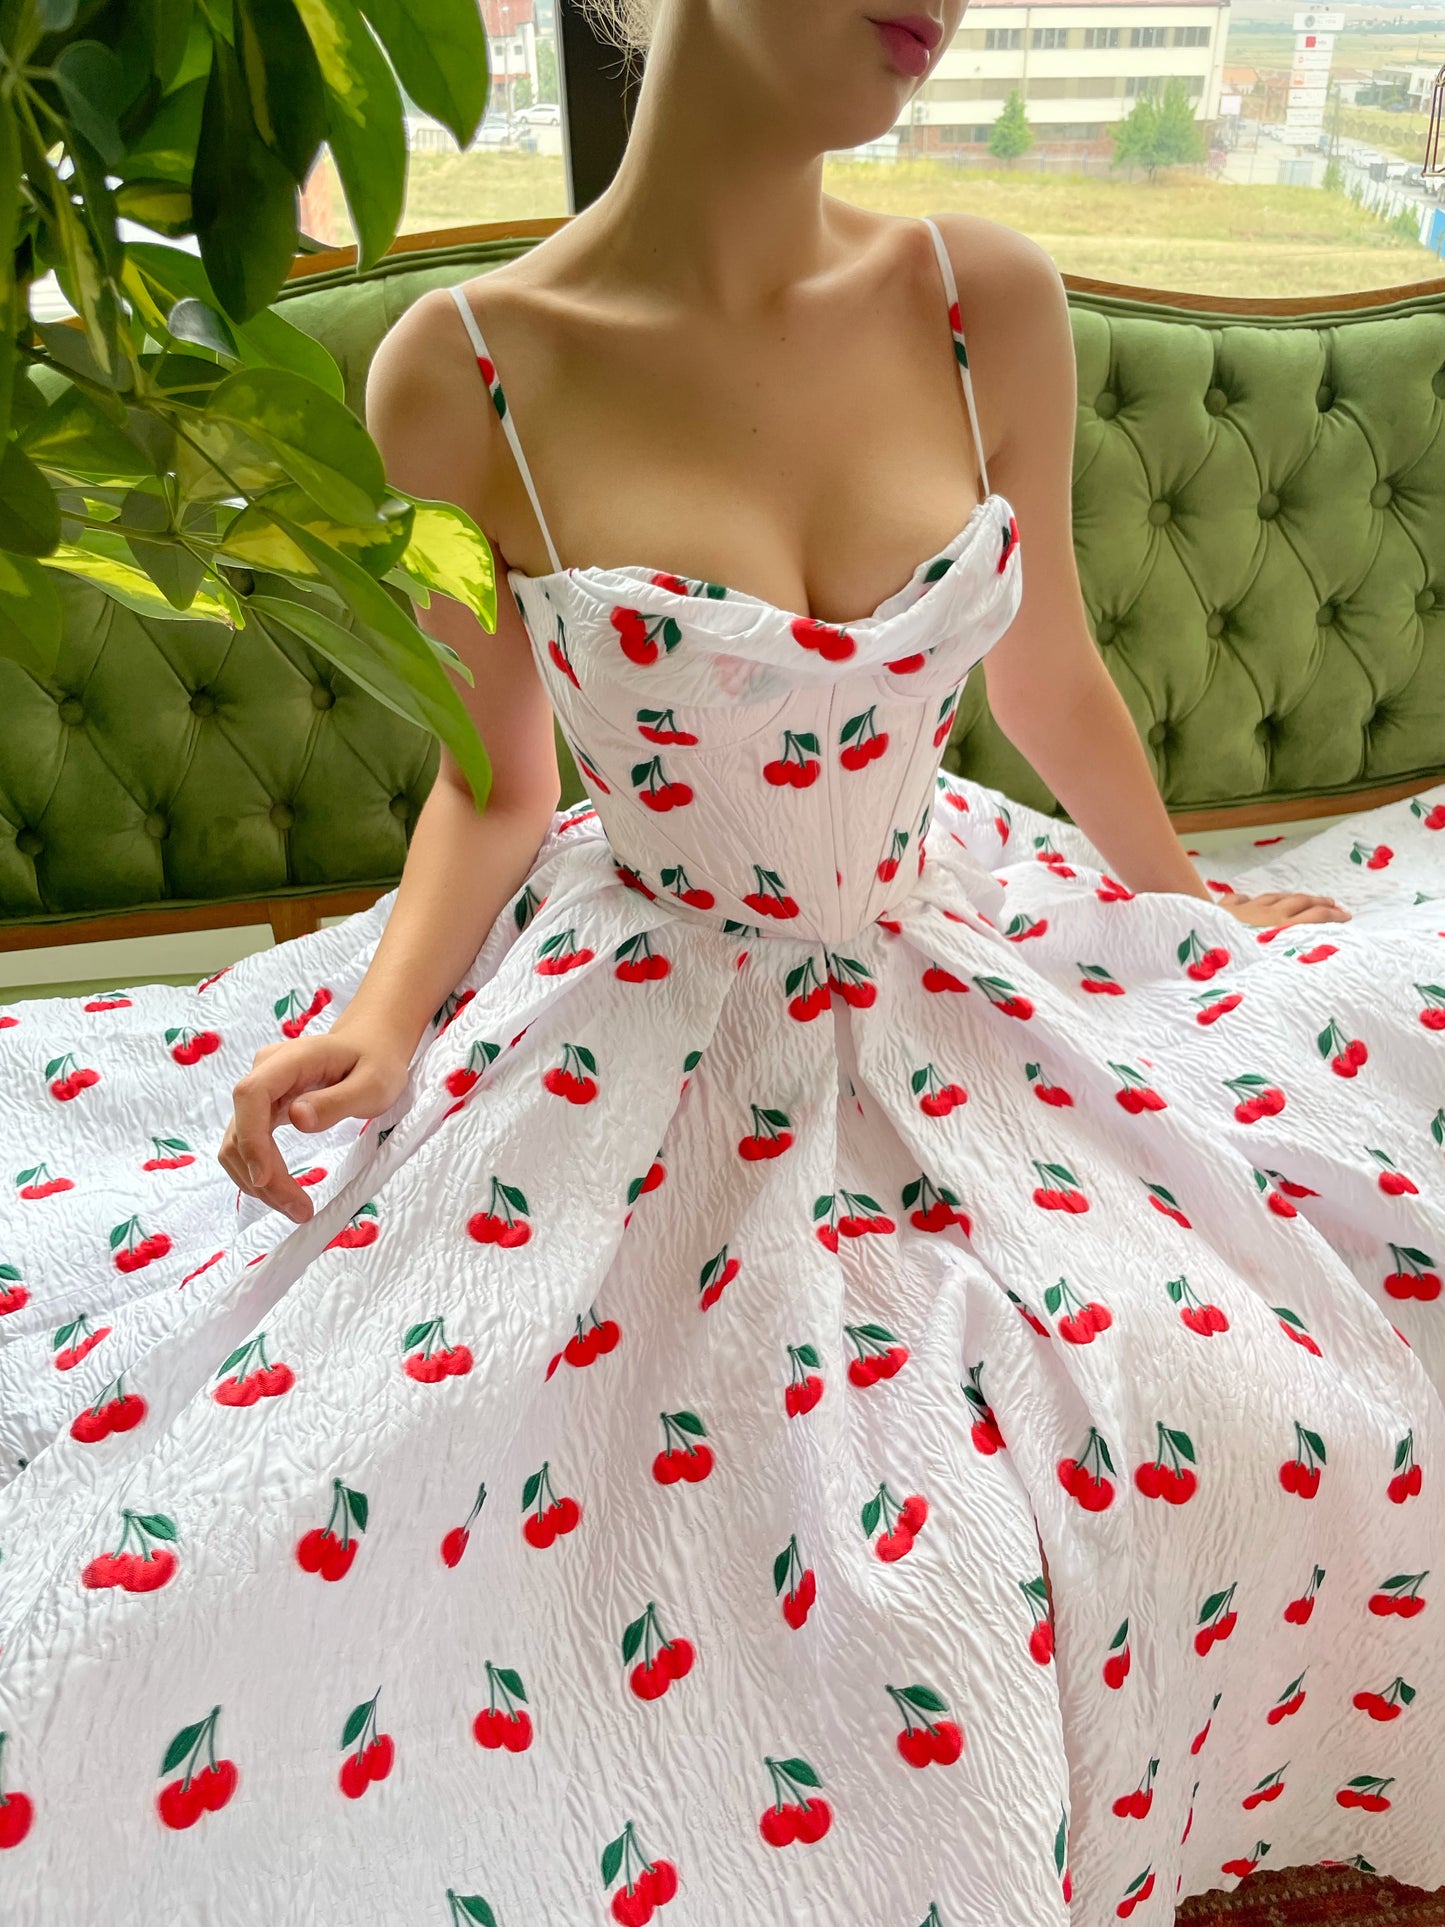 White two piece dress with spaghetti straps and printed cherries